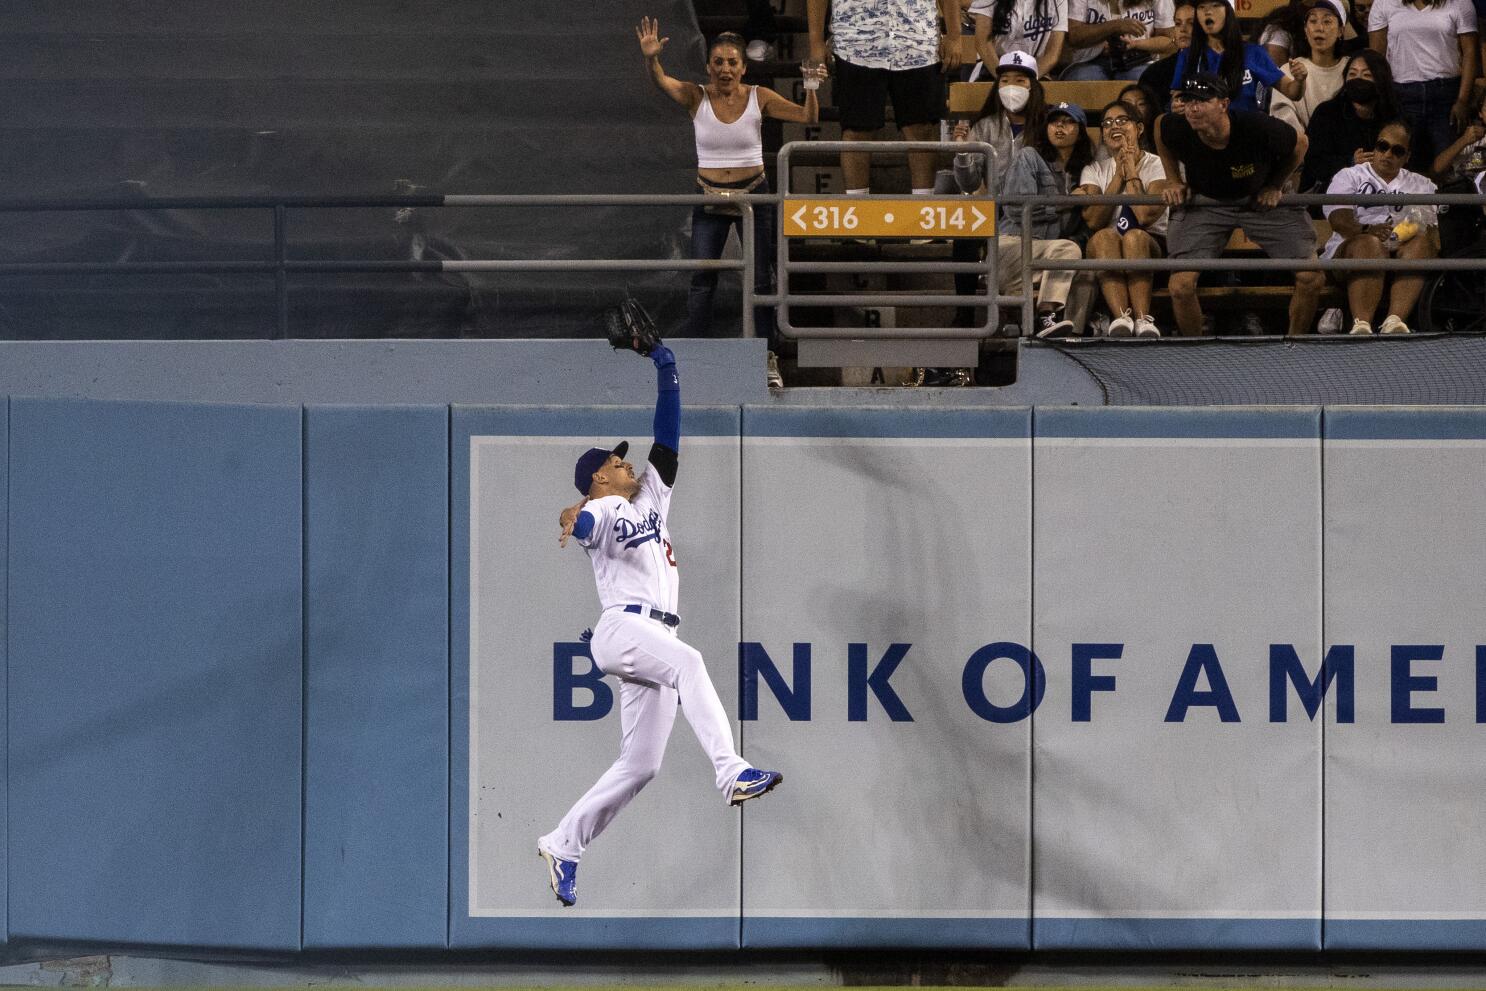 Dodgers' Trayce Thompson has come full circle after hitting 'rock bottom